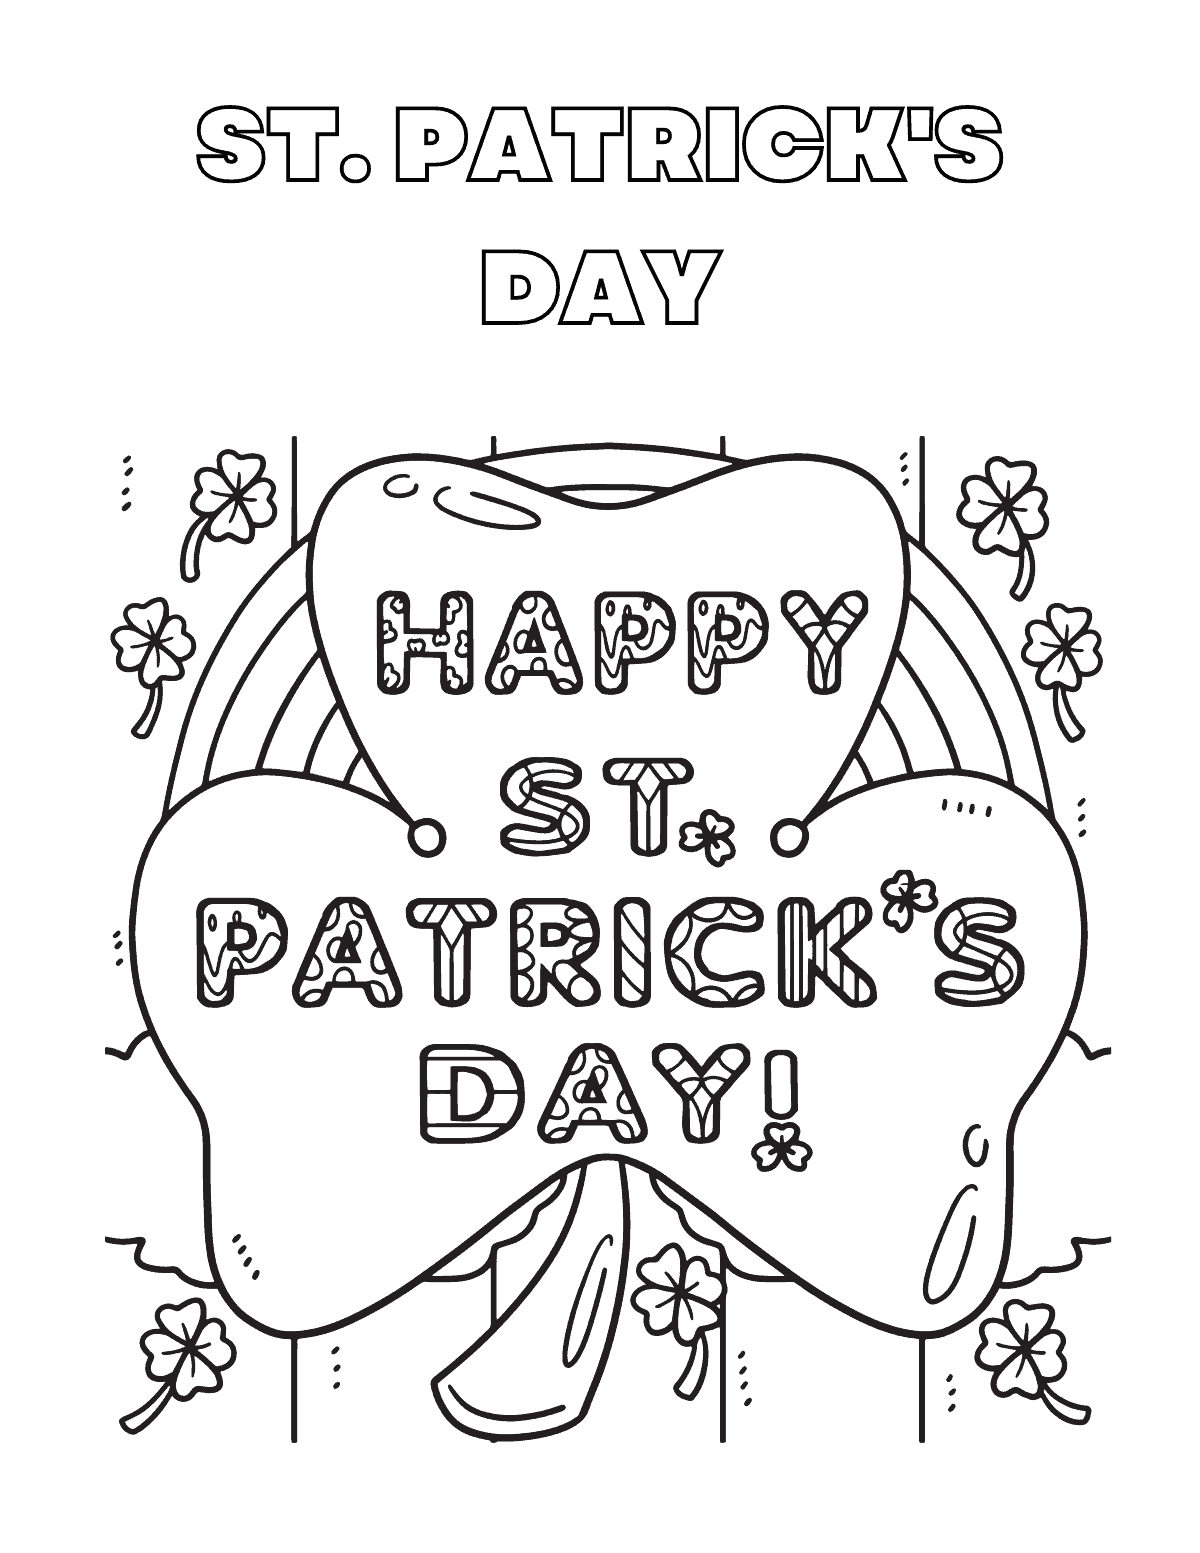 Happy St. Patrick's Day Shamrock Coloring Page